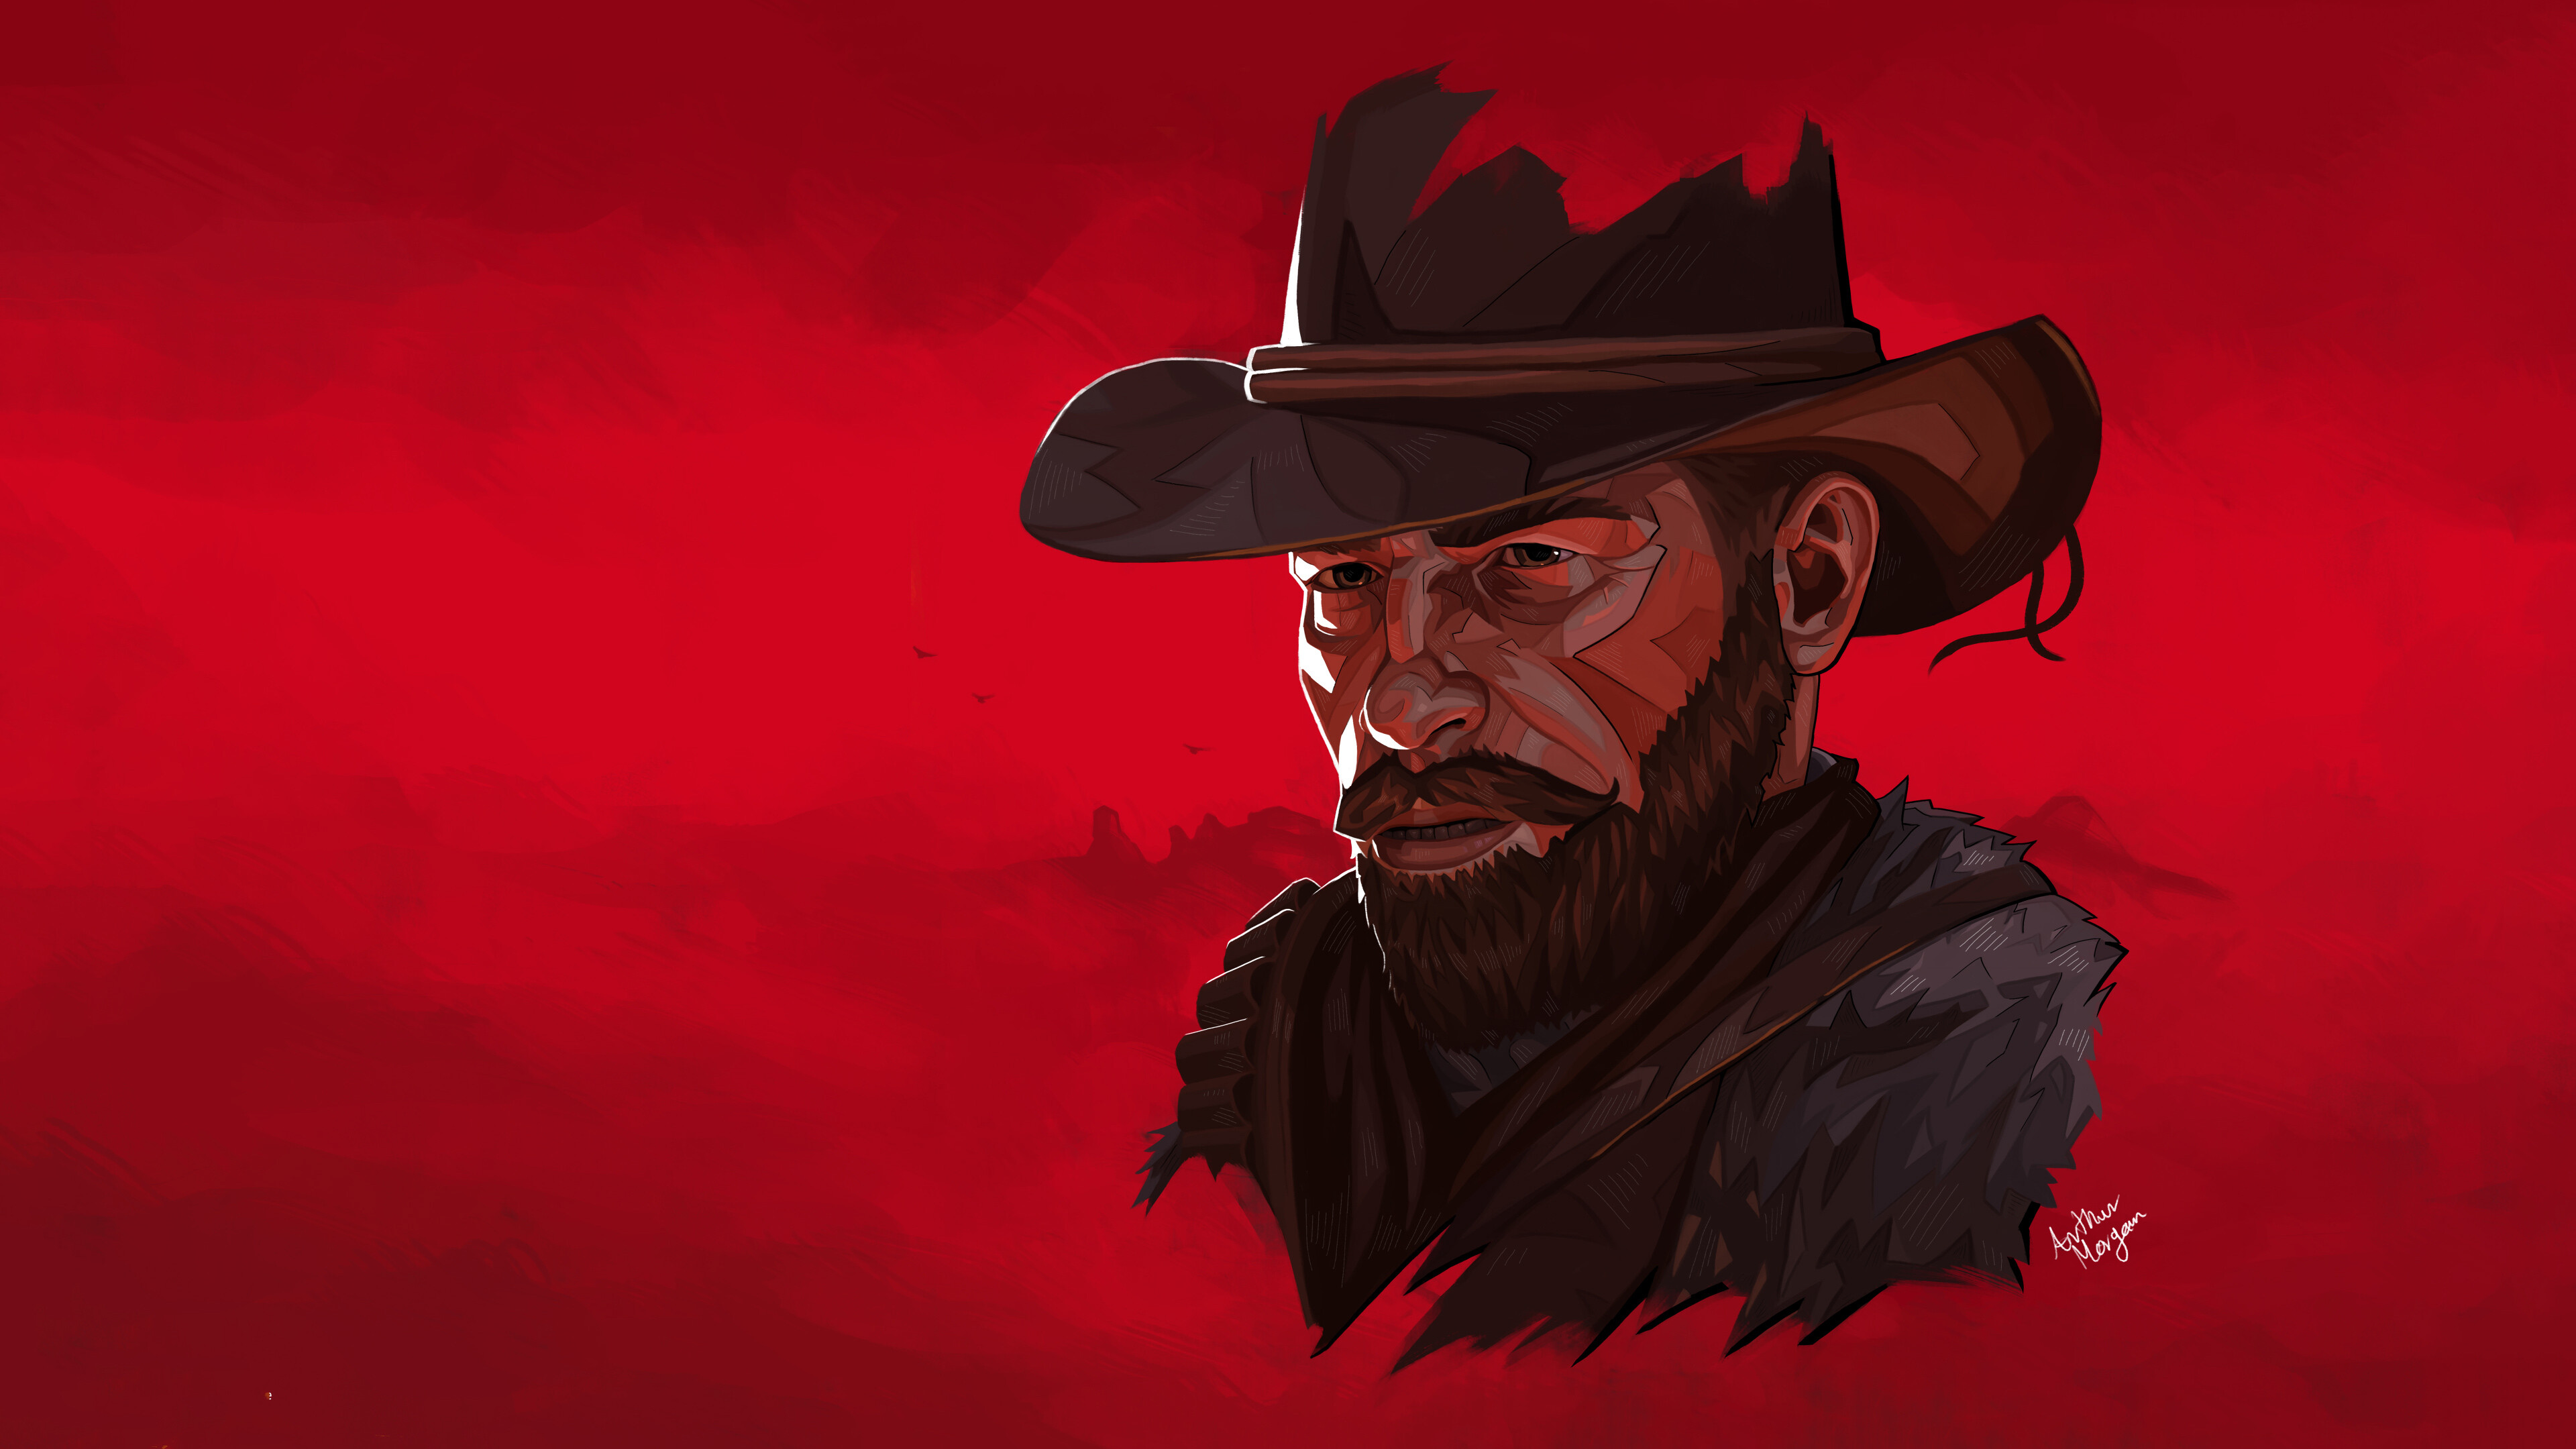 Red Dead Redemption: Arthur Morgan, The Main Protagonist and playable character. 3840x2160 4K Background.